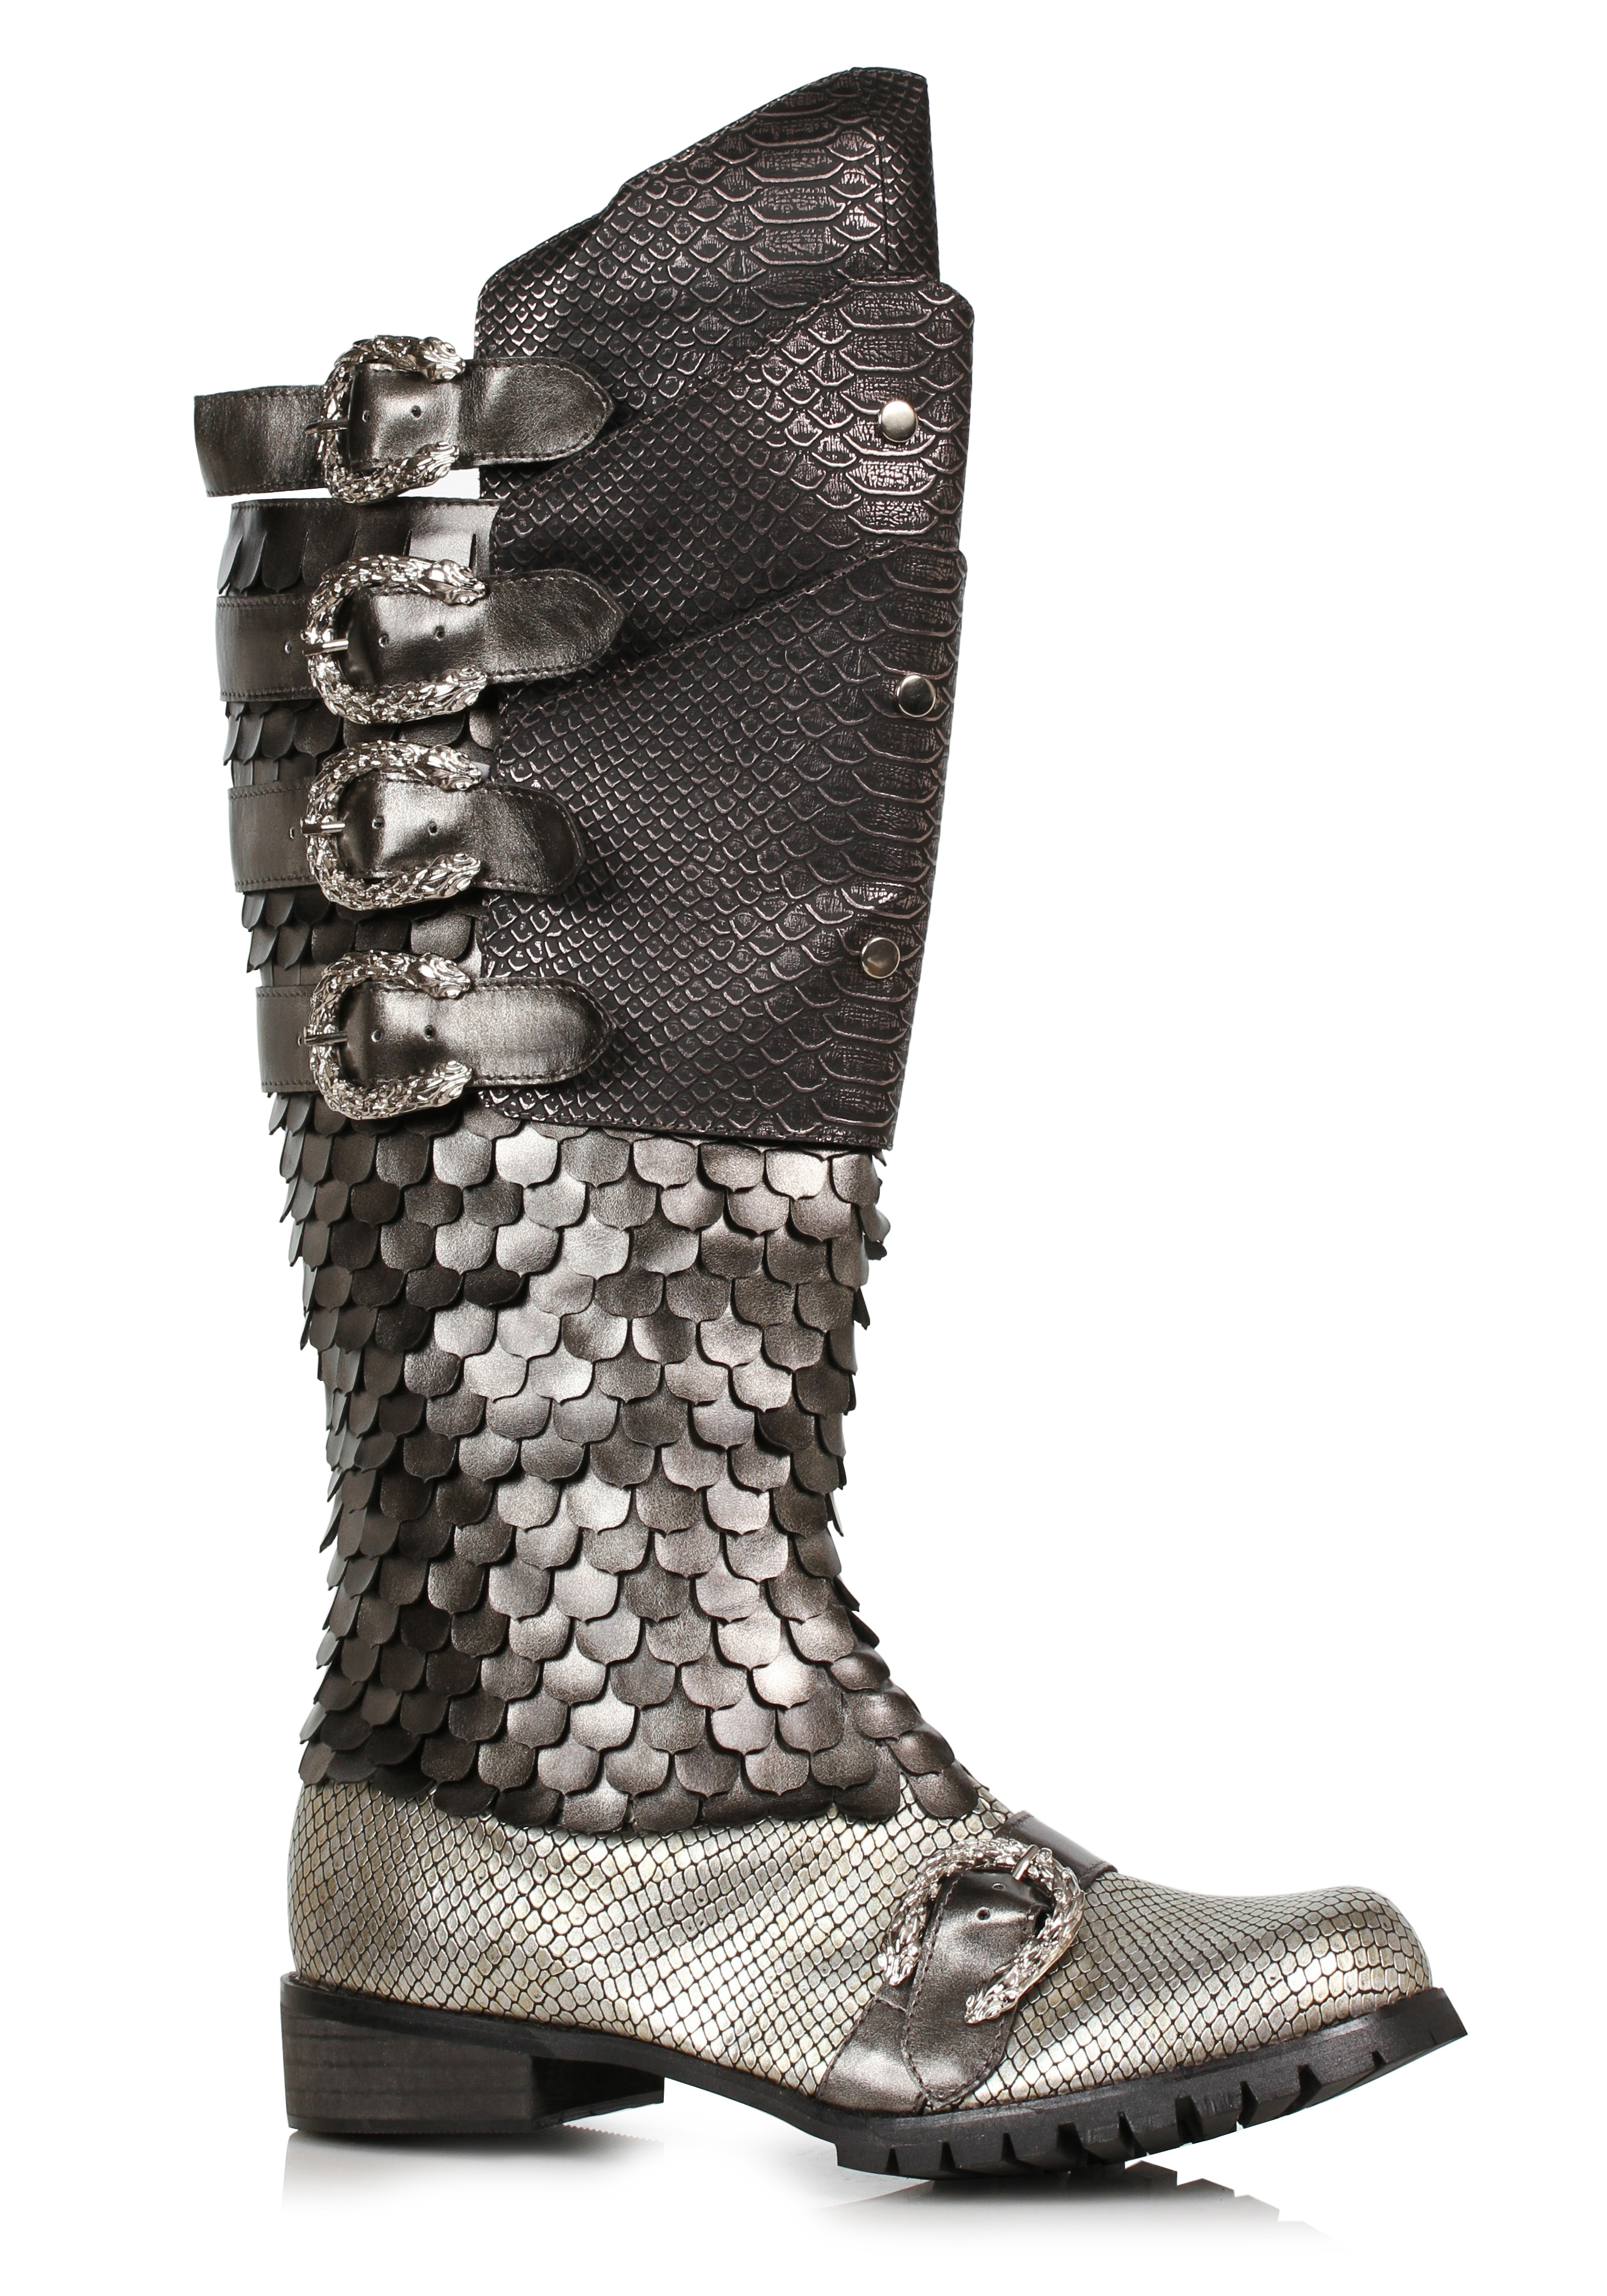 Ellie Shoes 158-DRAGO 1.5 Mens Dragon With Removable Cuffs |